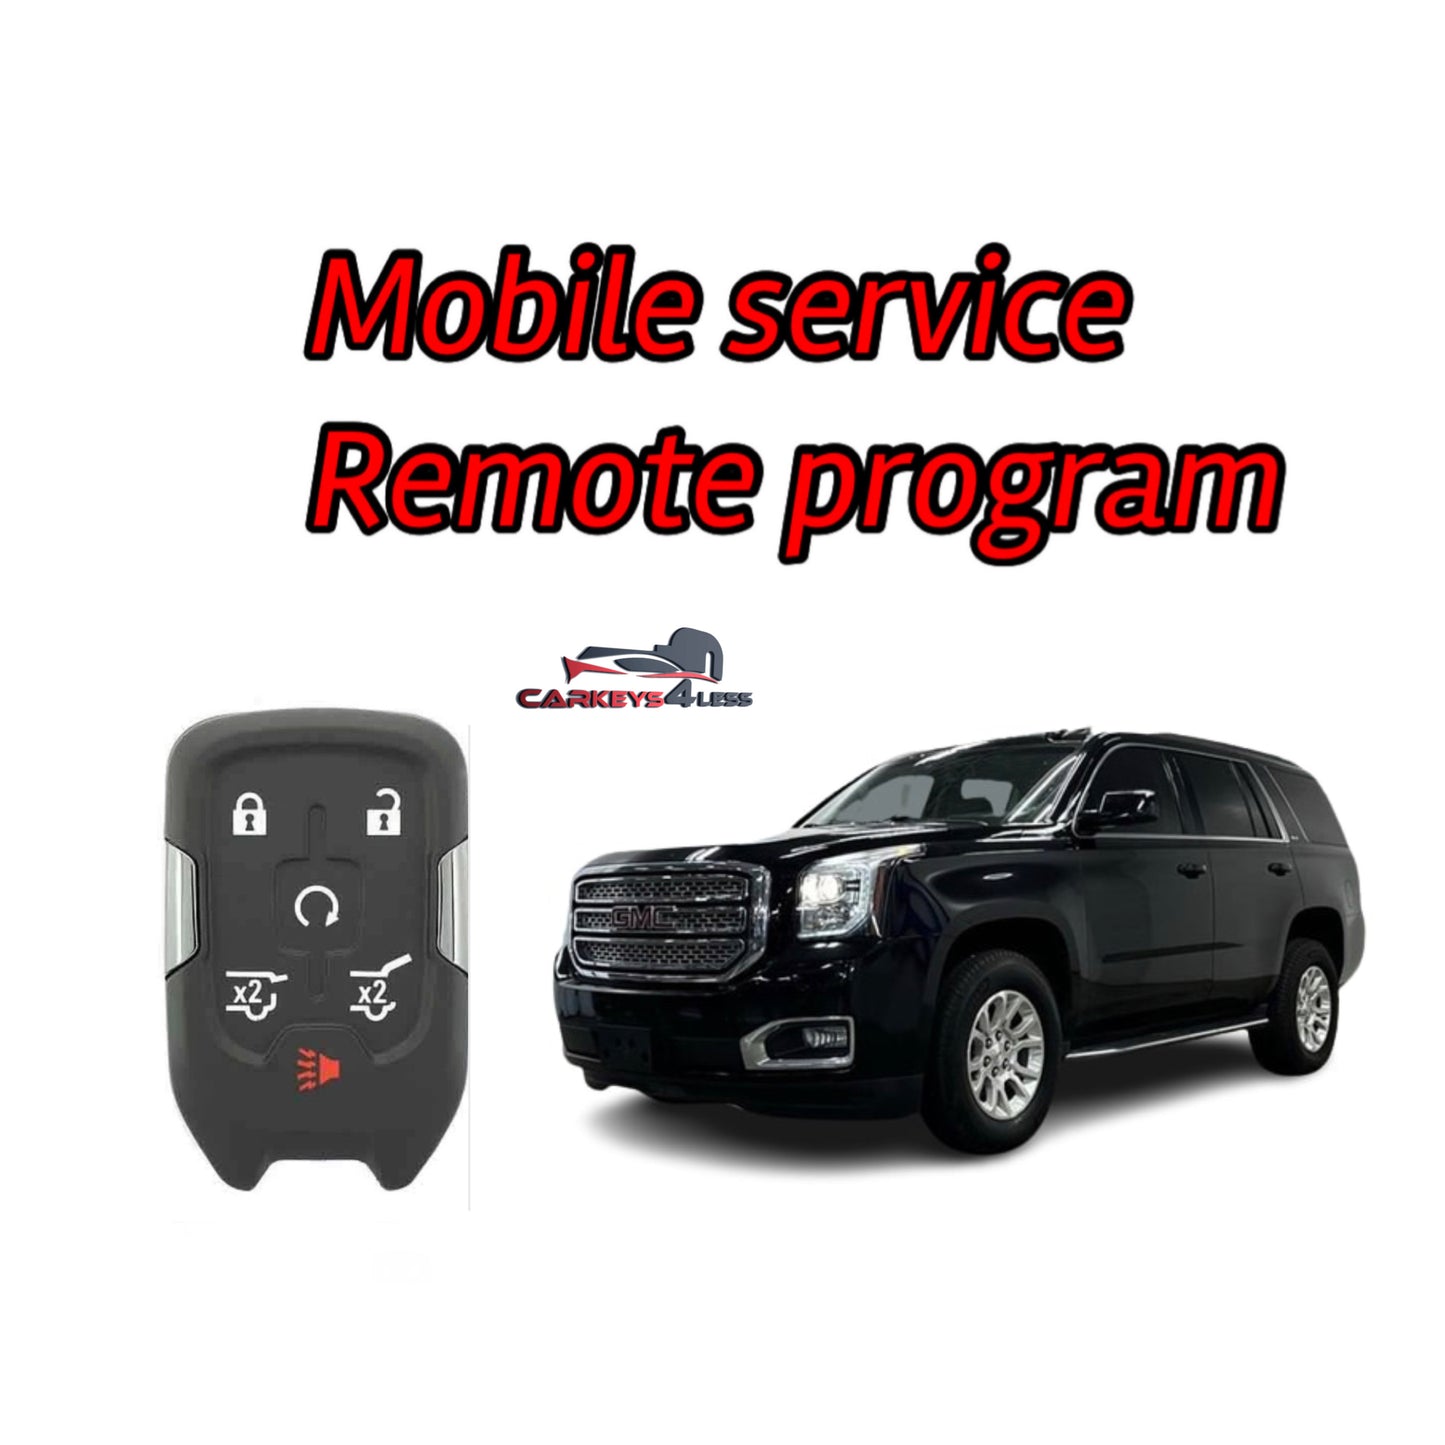 Mobile service for an aftermarket chevy/gmc car key replacement all keys lost or spare